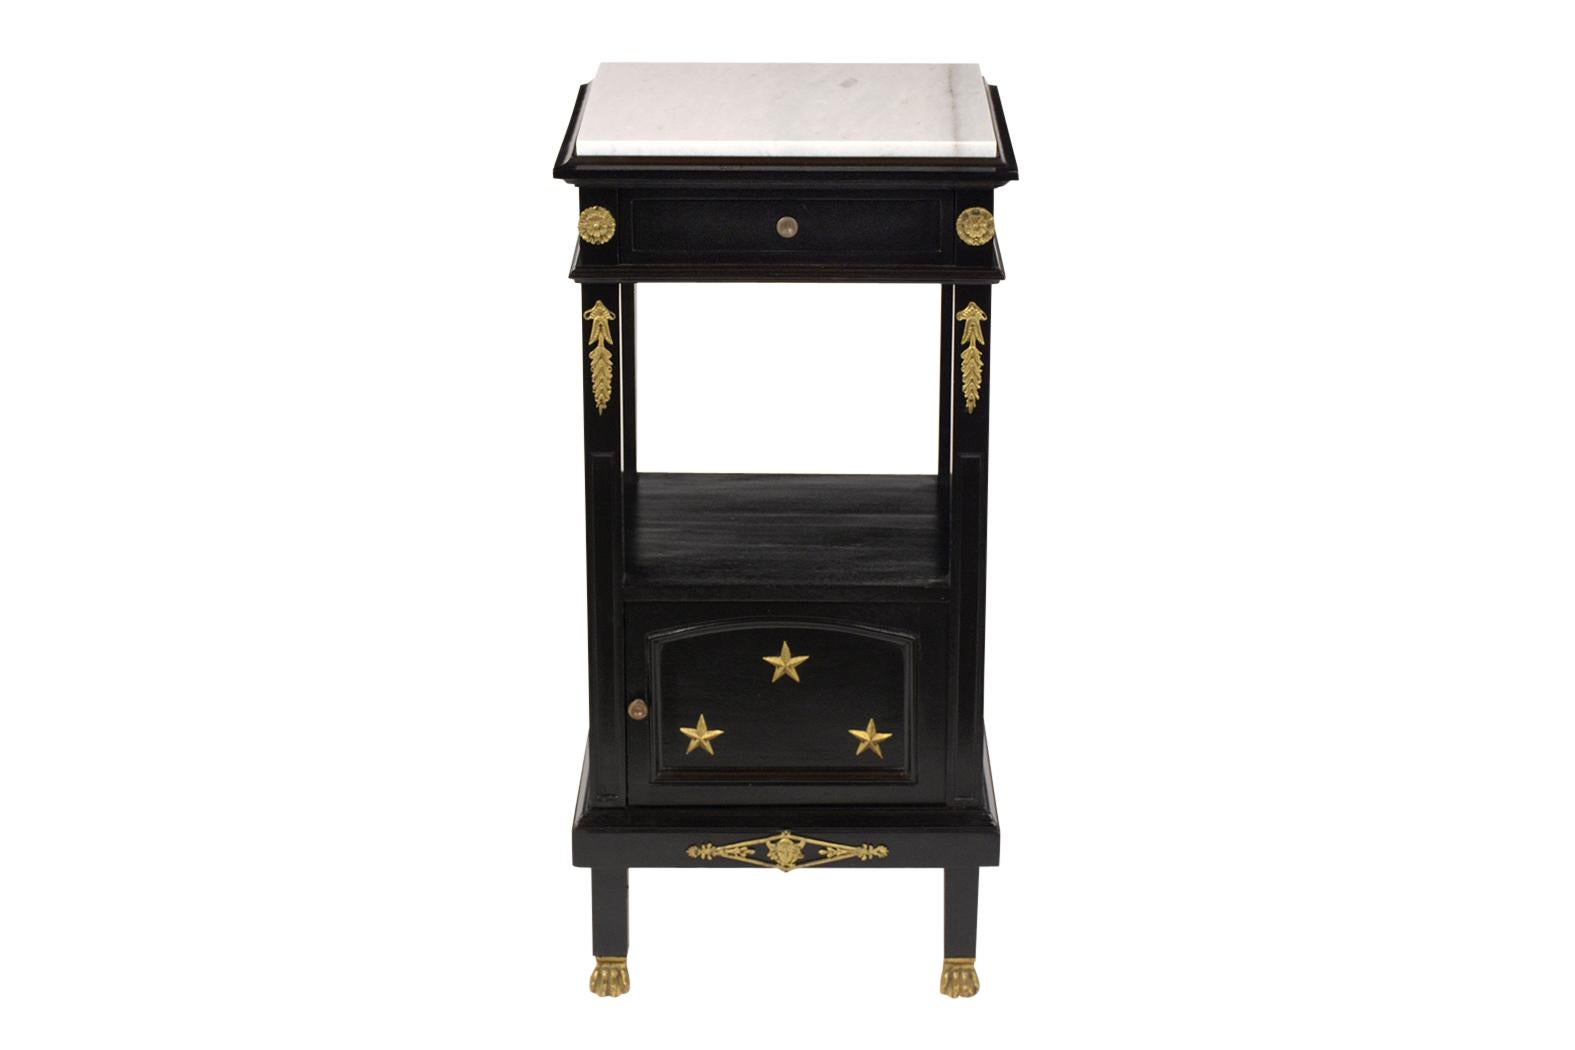 A French antique Empire style nightstand has been completed restored, features a newly black lacquered finish, and comes with a new Carrara marble top. The nightstand also has a single top drawer, a small open shelf in the center, and a door covered